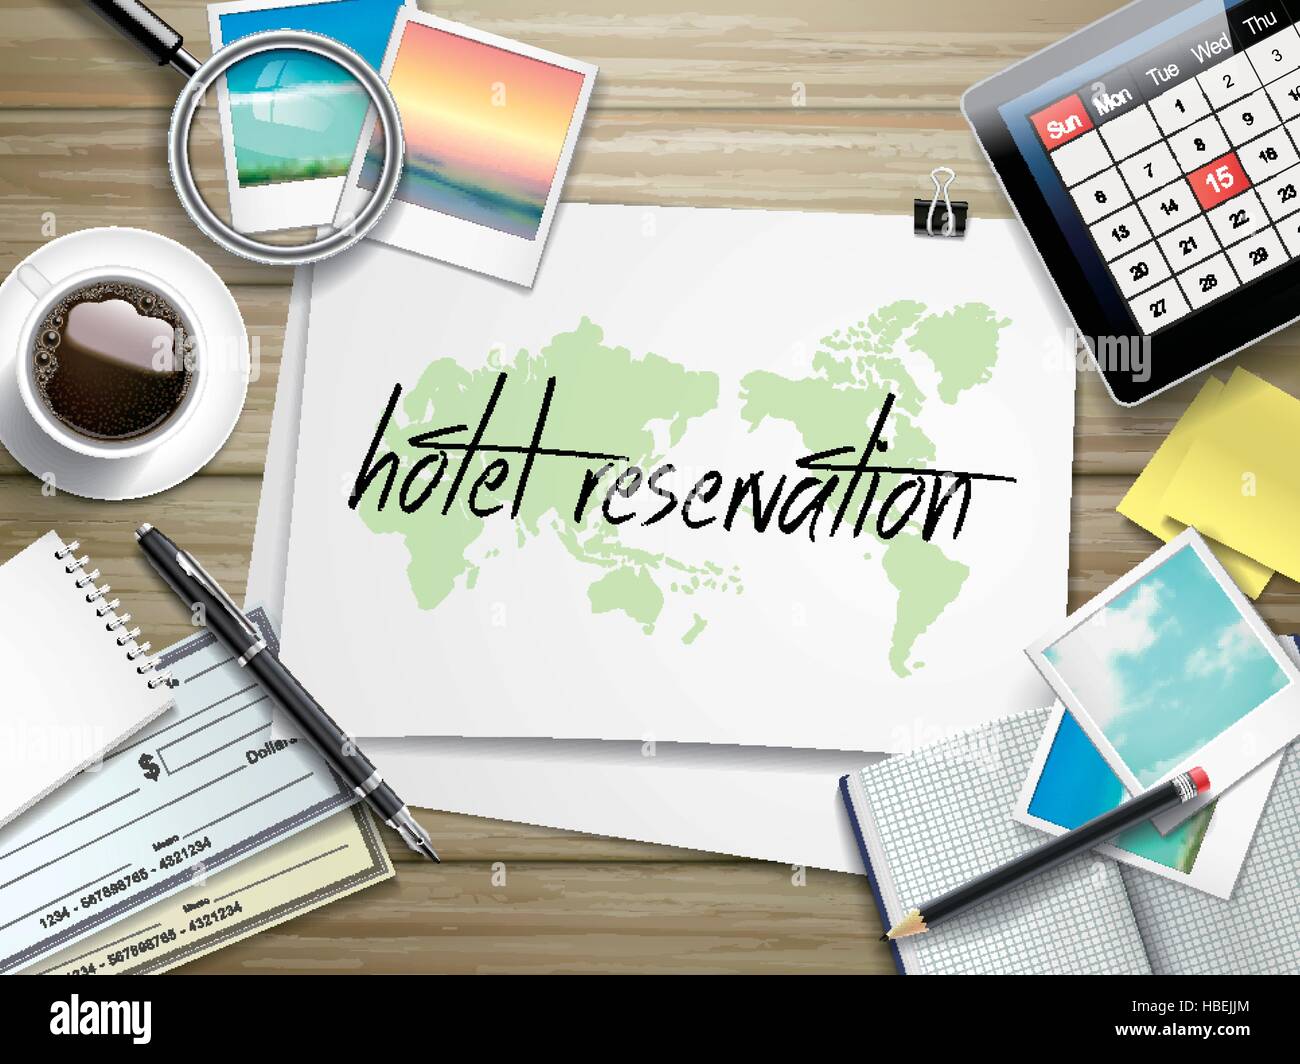 top view of travel items on wooden table with hotel reservation written on paper Stock Vector